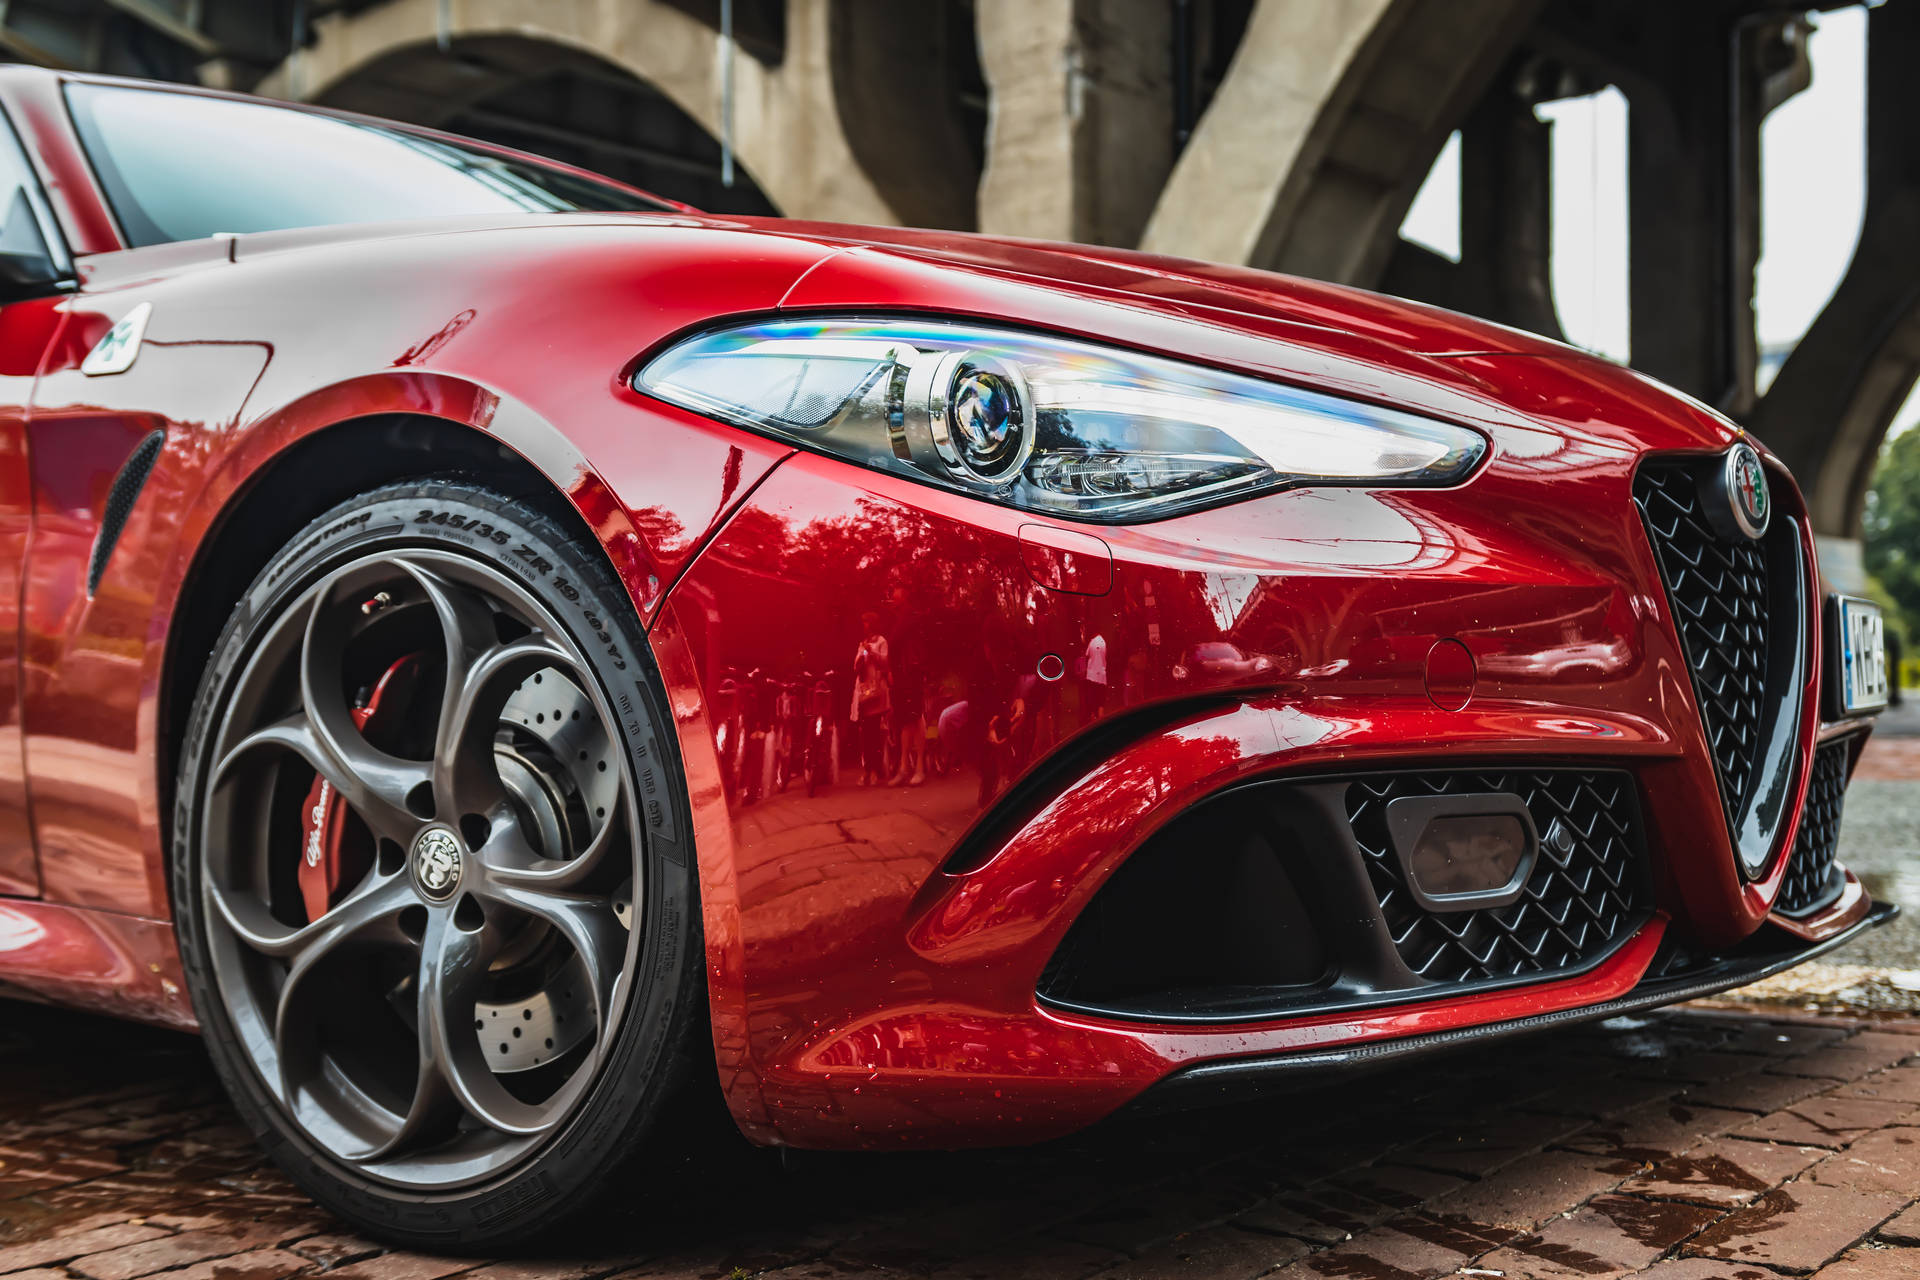 Get Ready to Rev Your Engines with the Alfa Romeo Giulia Wallpaper